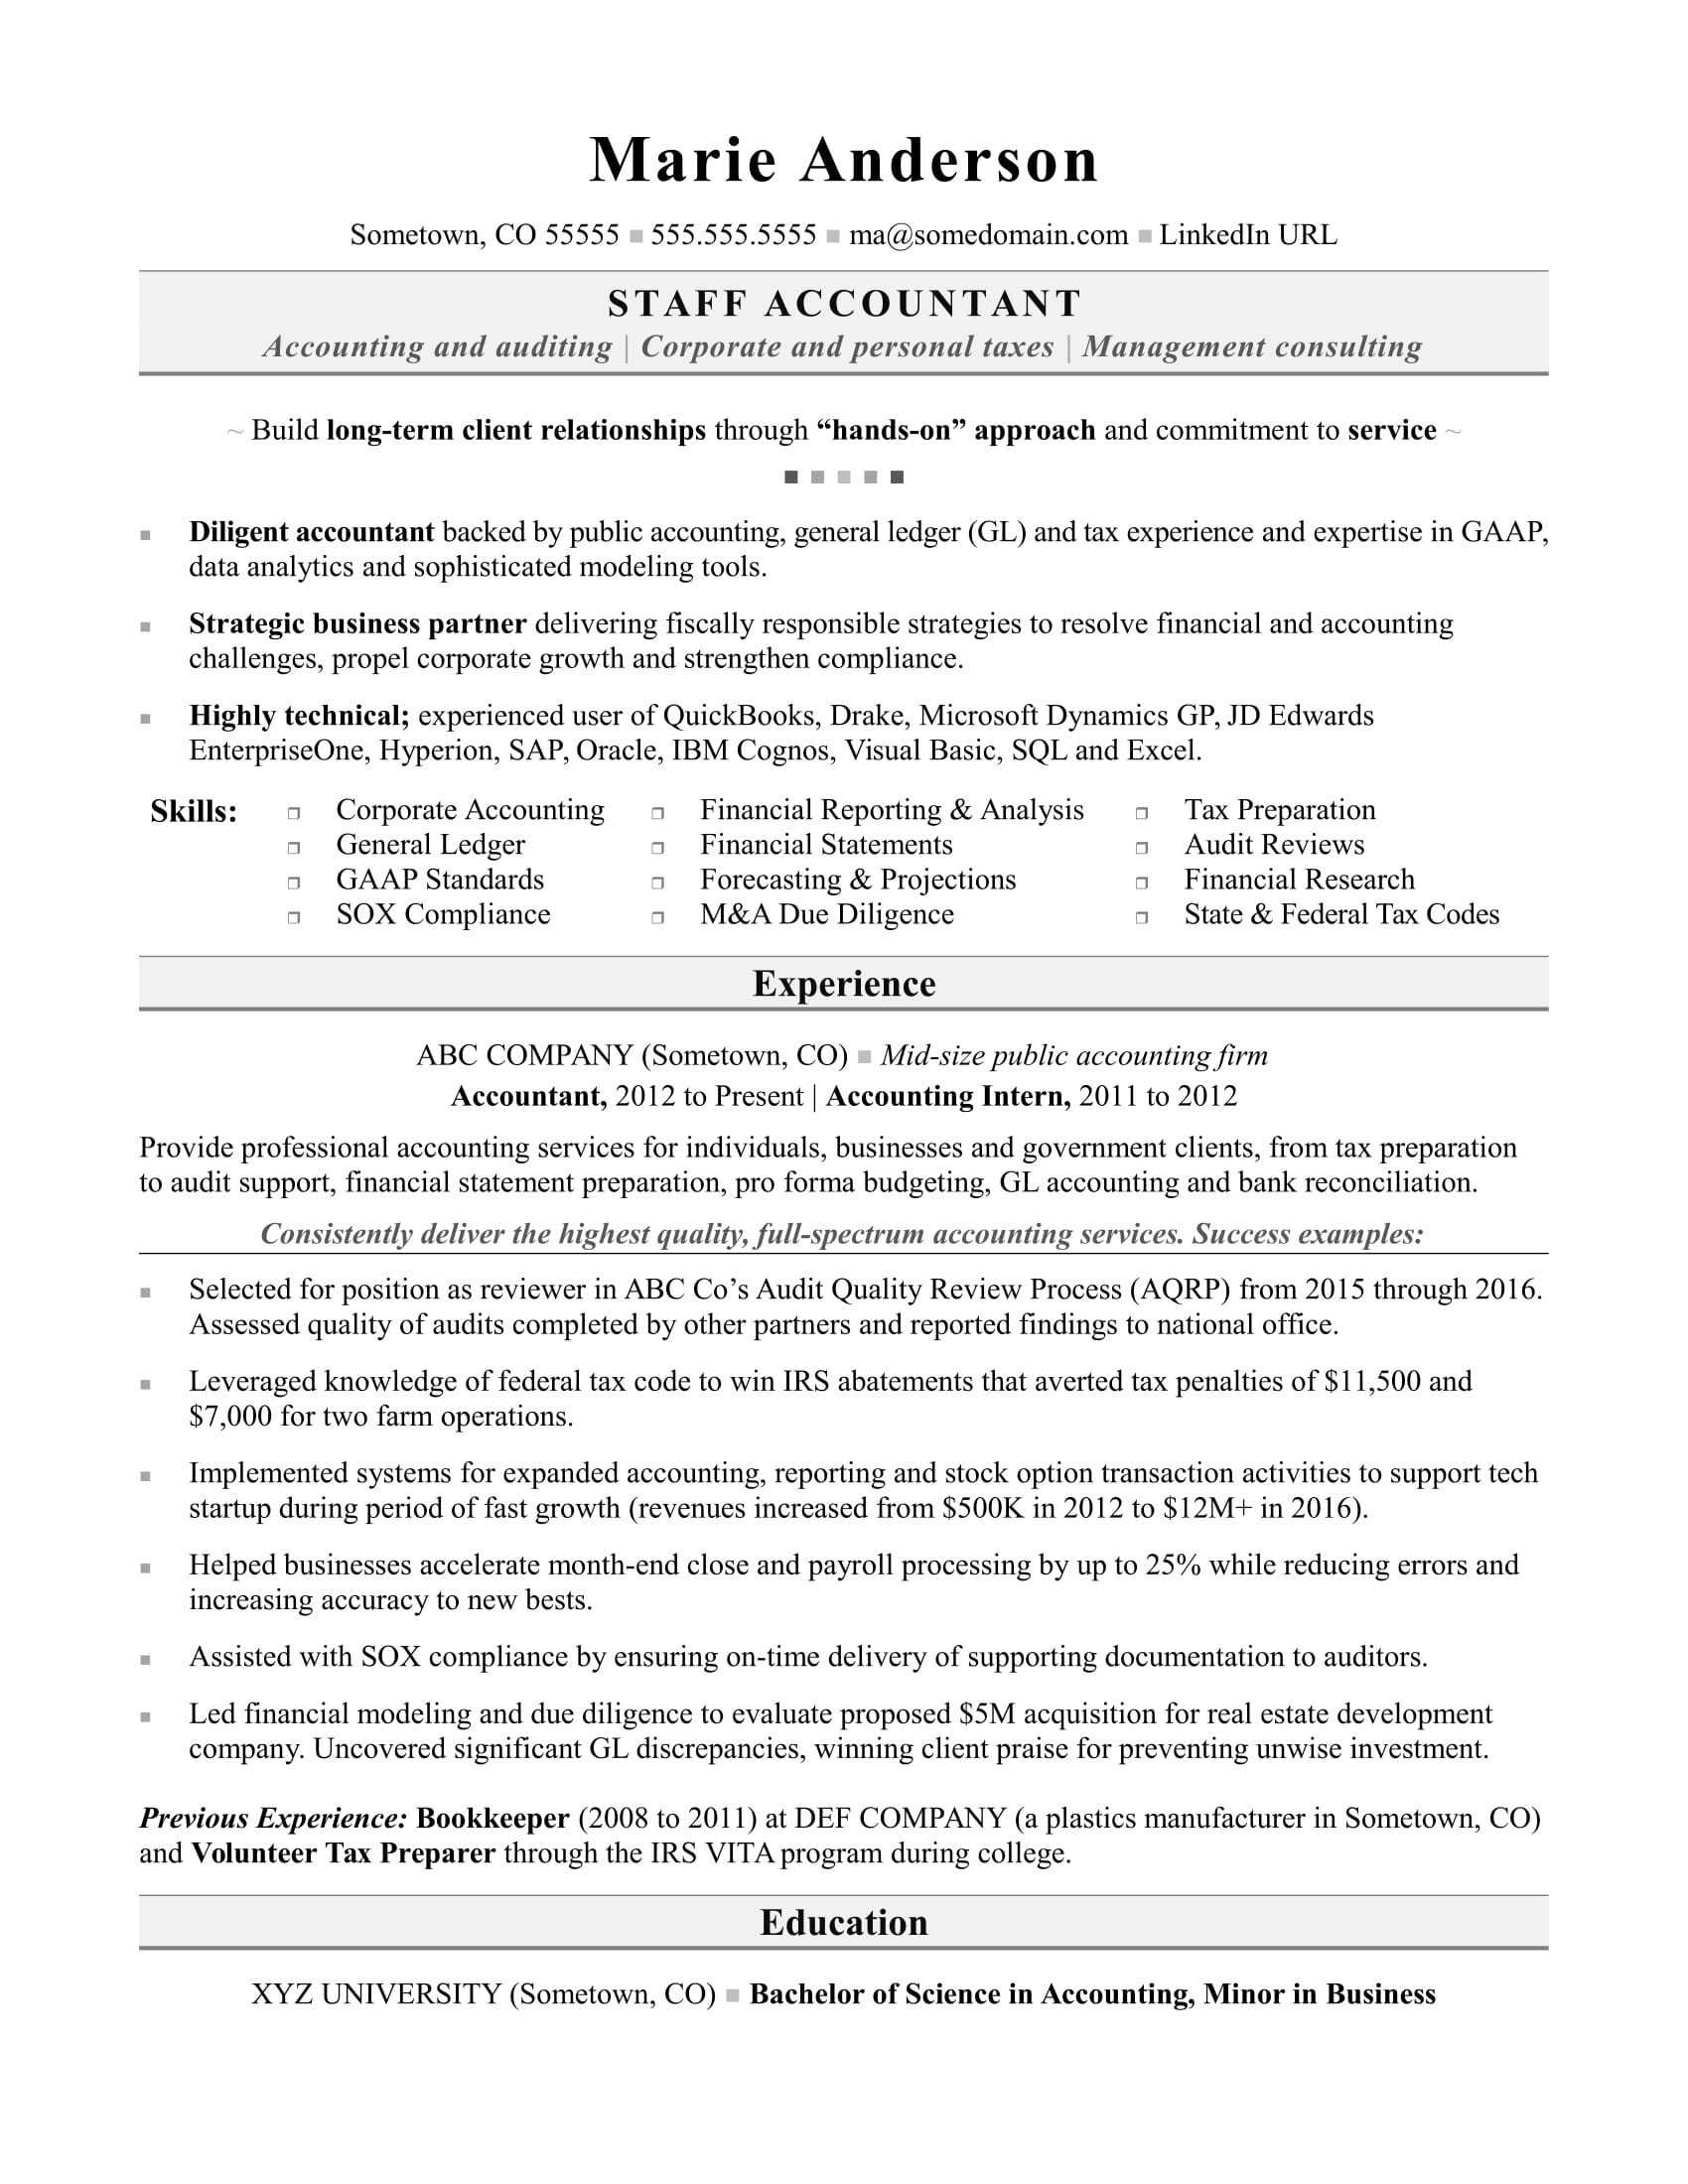 Sample Resume for Accontant Job In Usa Accountant Resume Monster.com